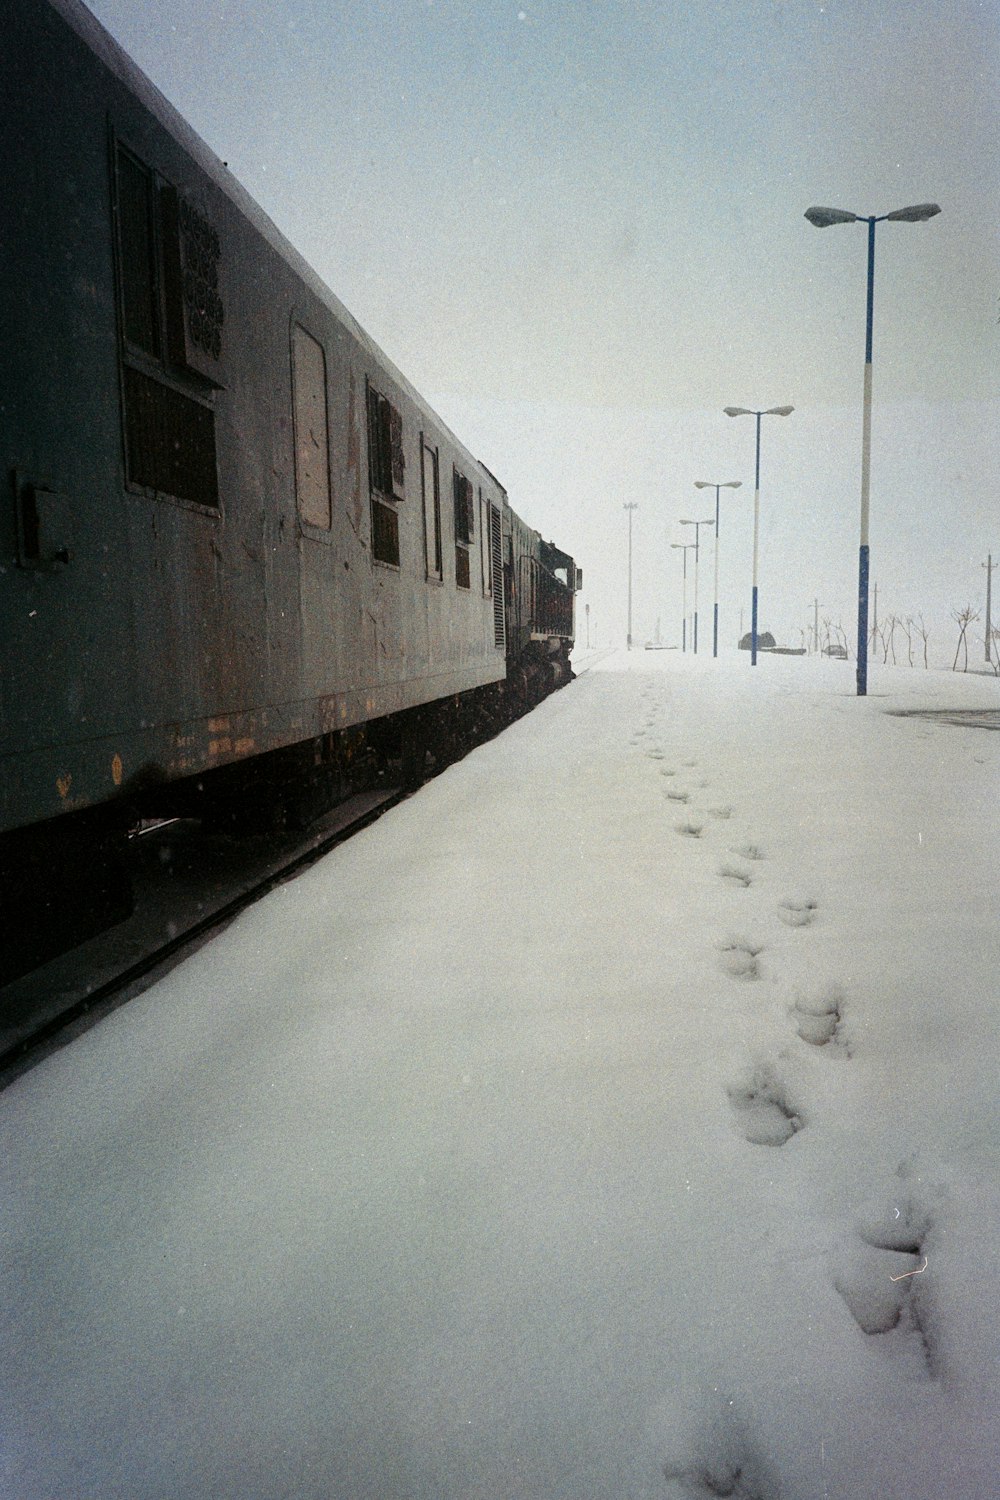 a train traveling down train tracks covered in snow